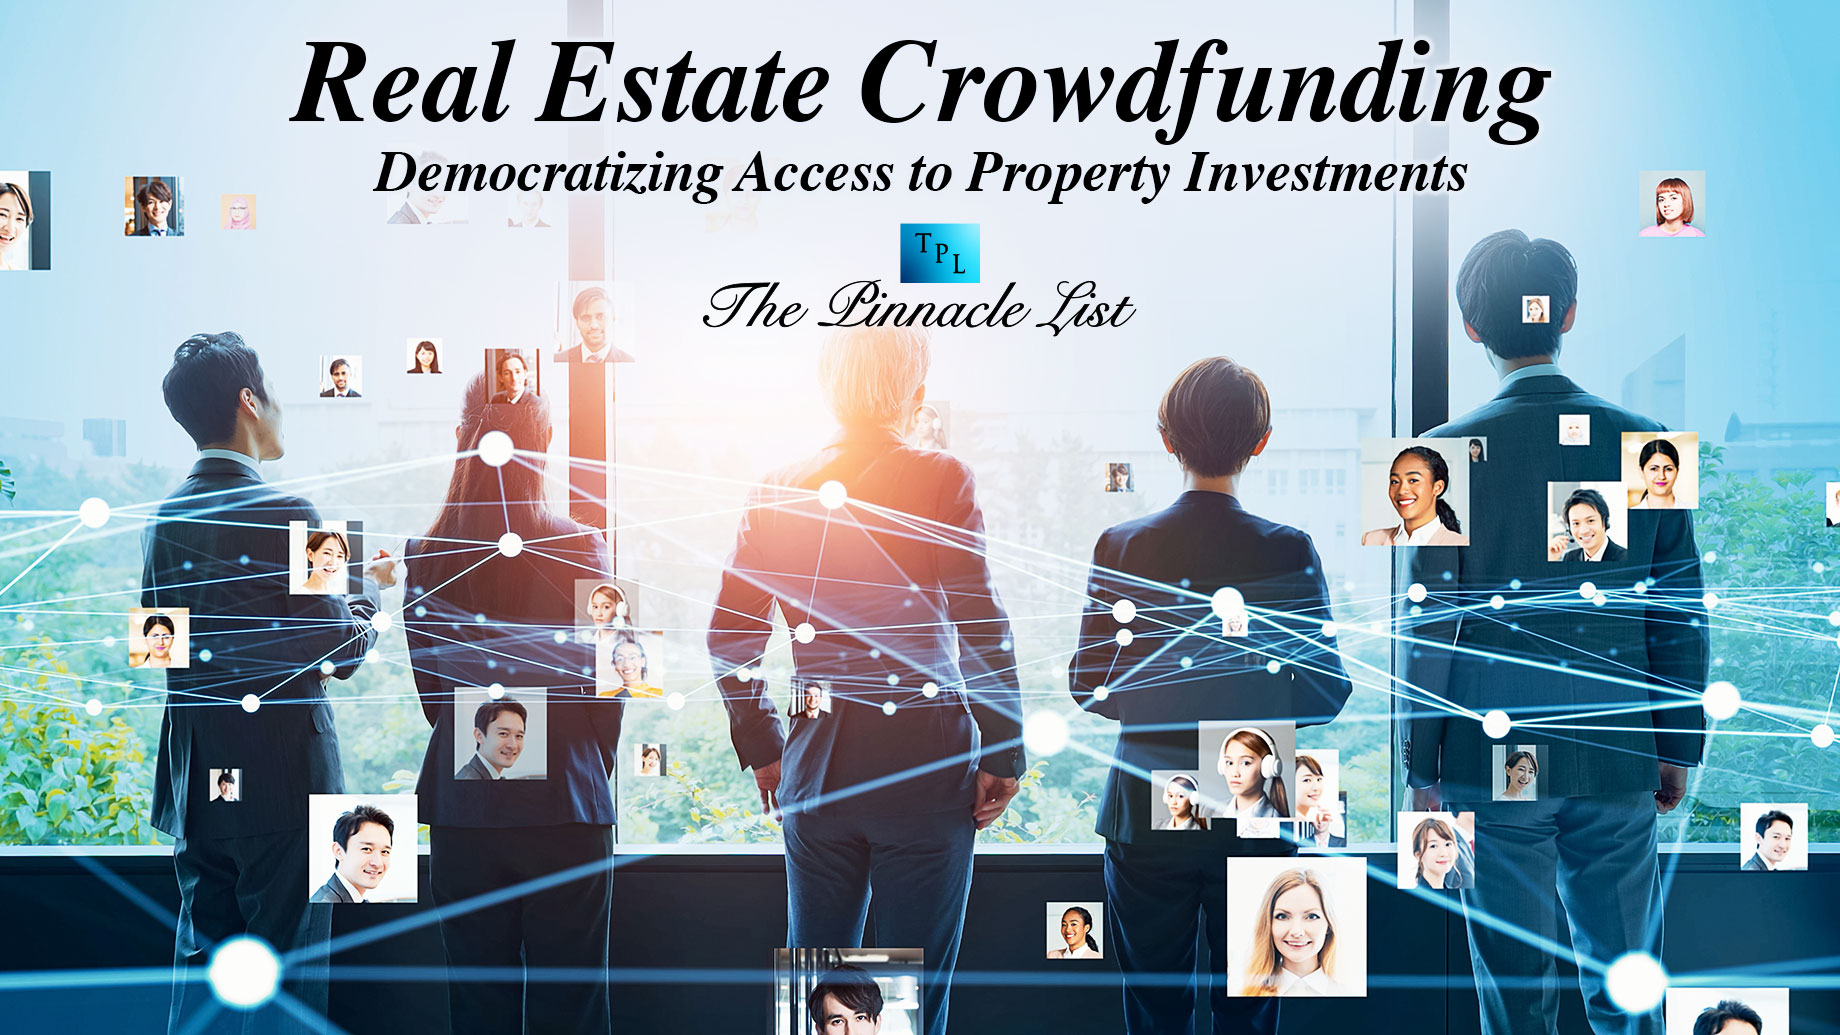 Real Estate Crowdfunding: Democratizing Access to Property Investments